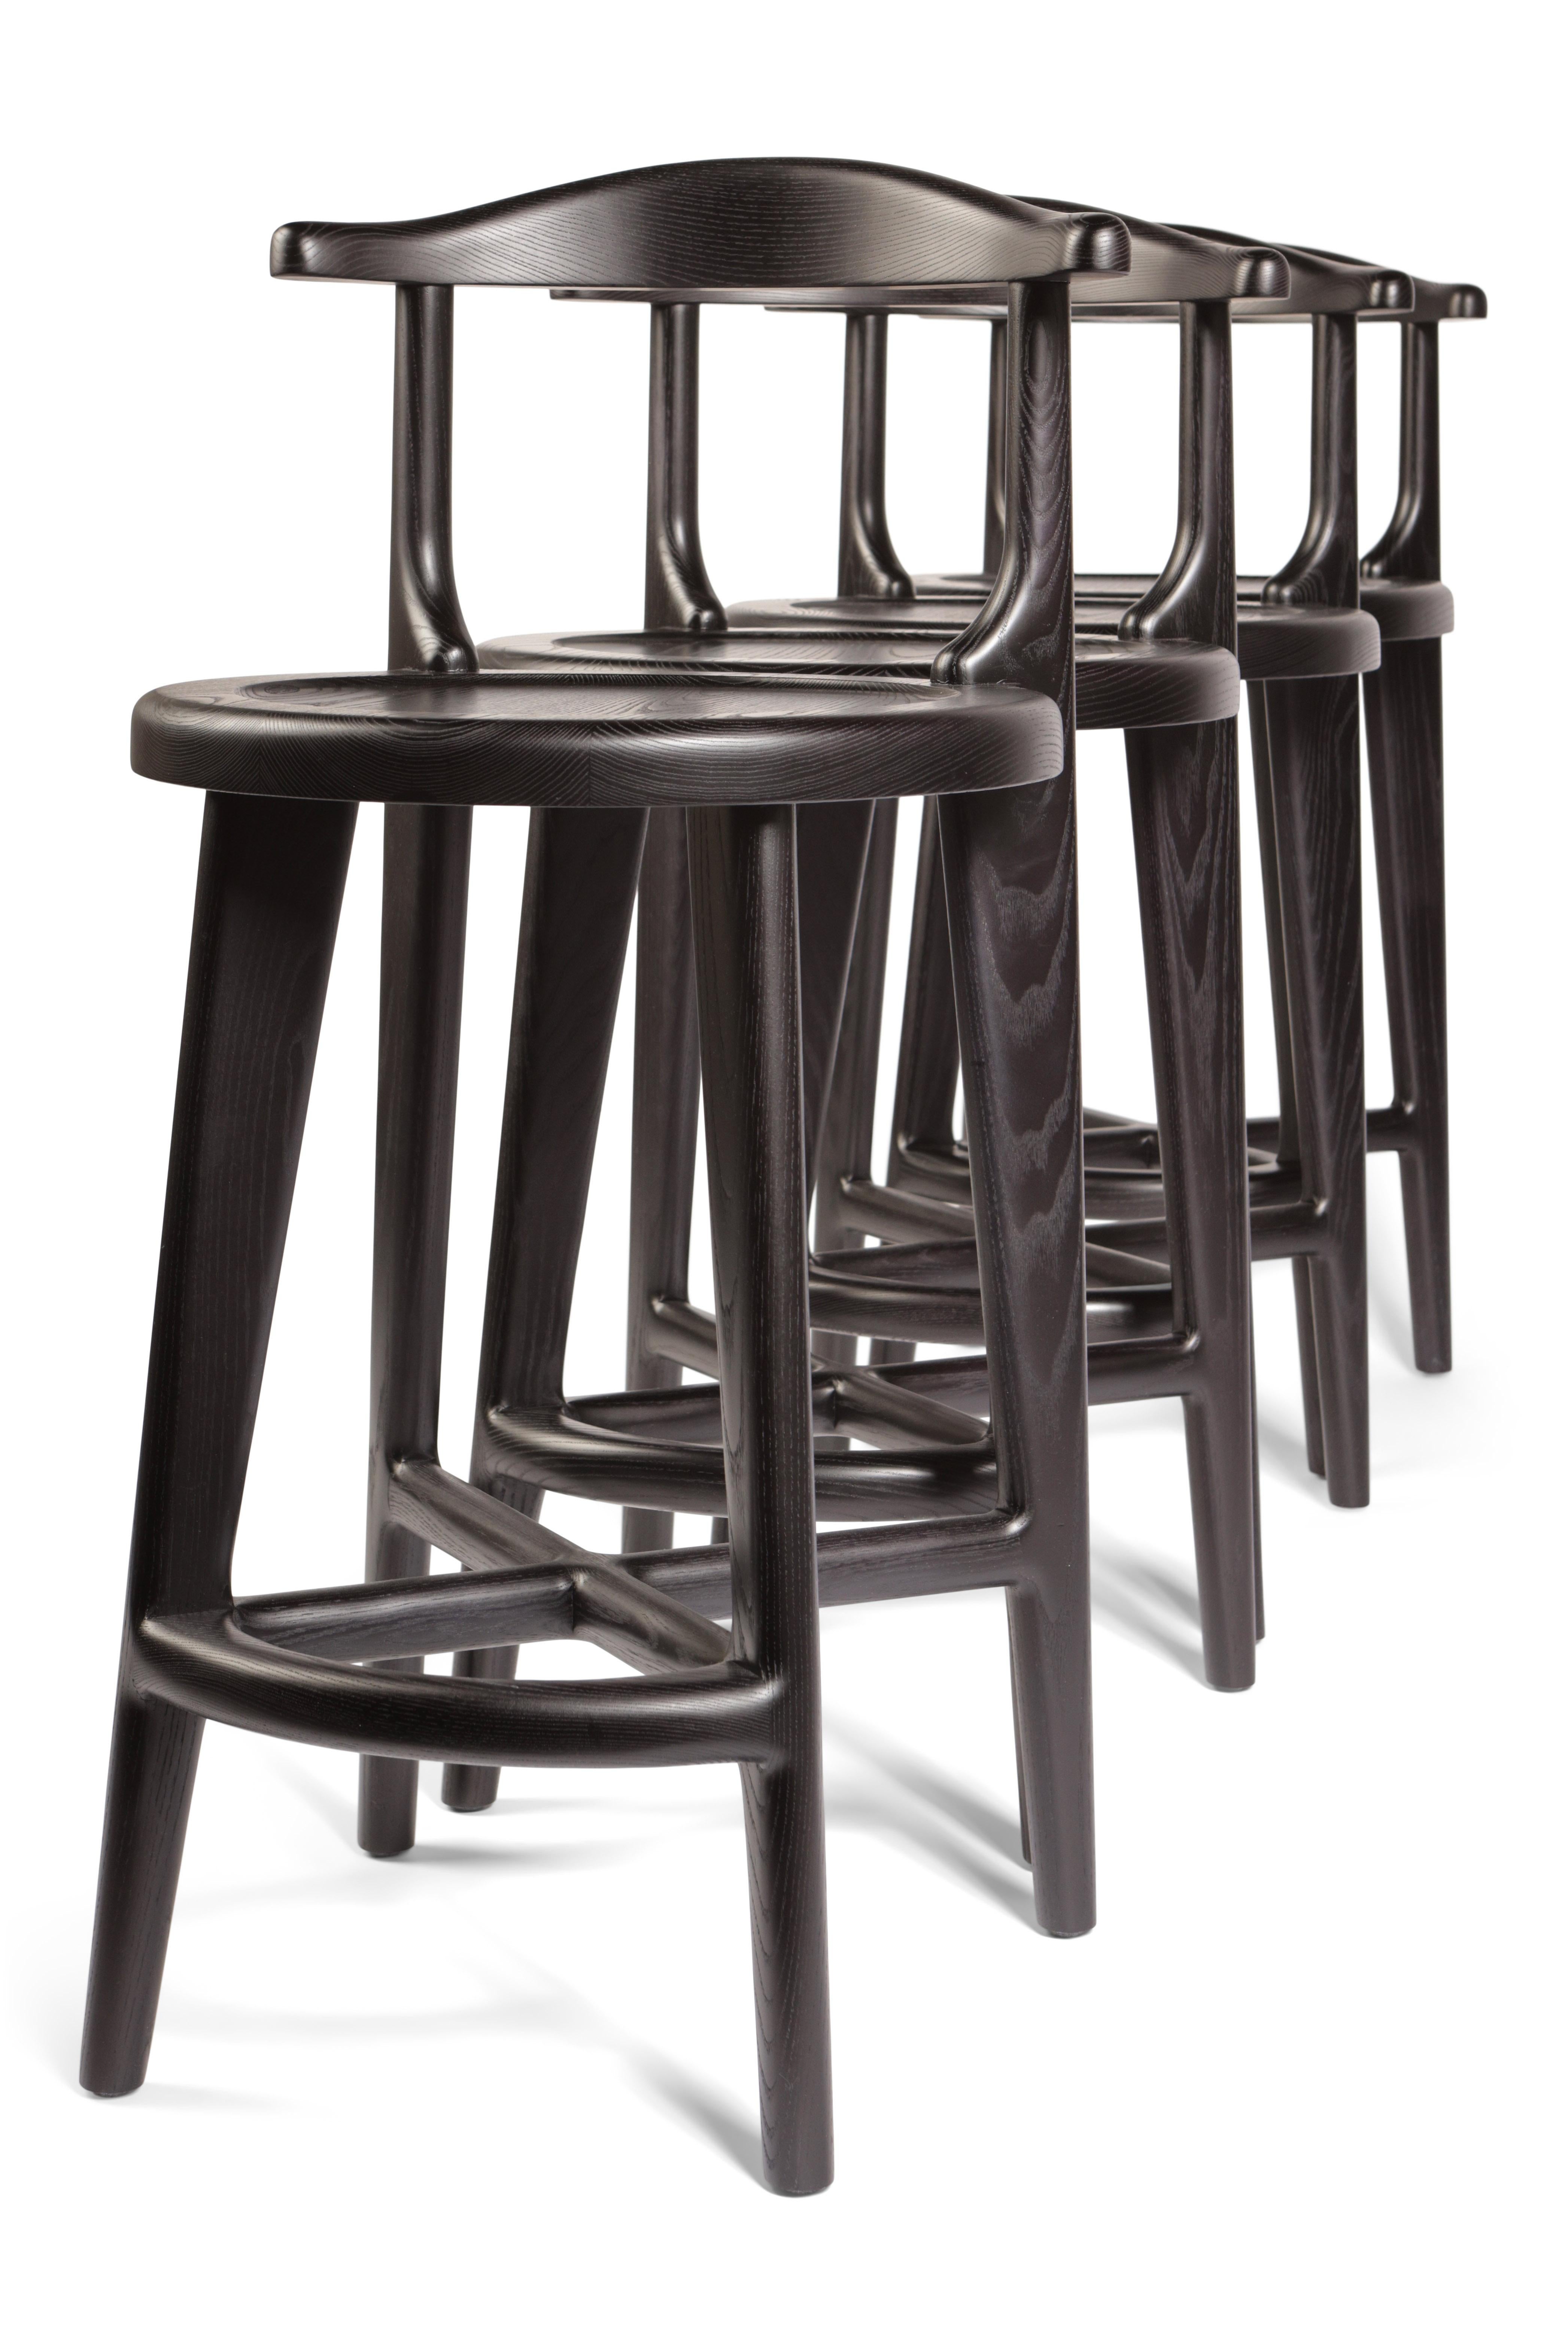 A classic design that will beautifully suit any home interior. Crafted from solid American Ash with a grain-popping jet-Black stain. Our stools feature generously sized seats and ergonomically sculpted back / arm rests.
A beautifully sculpted